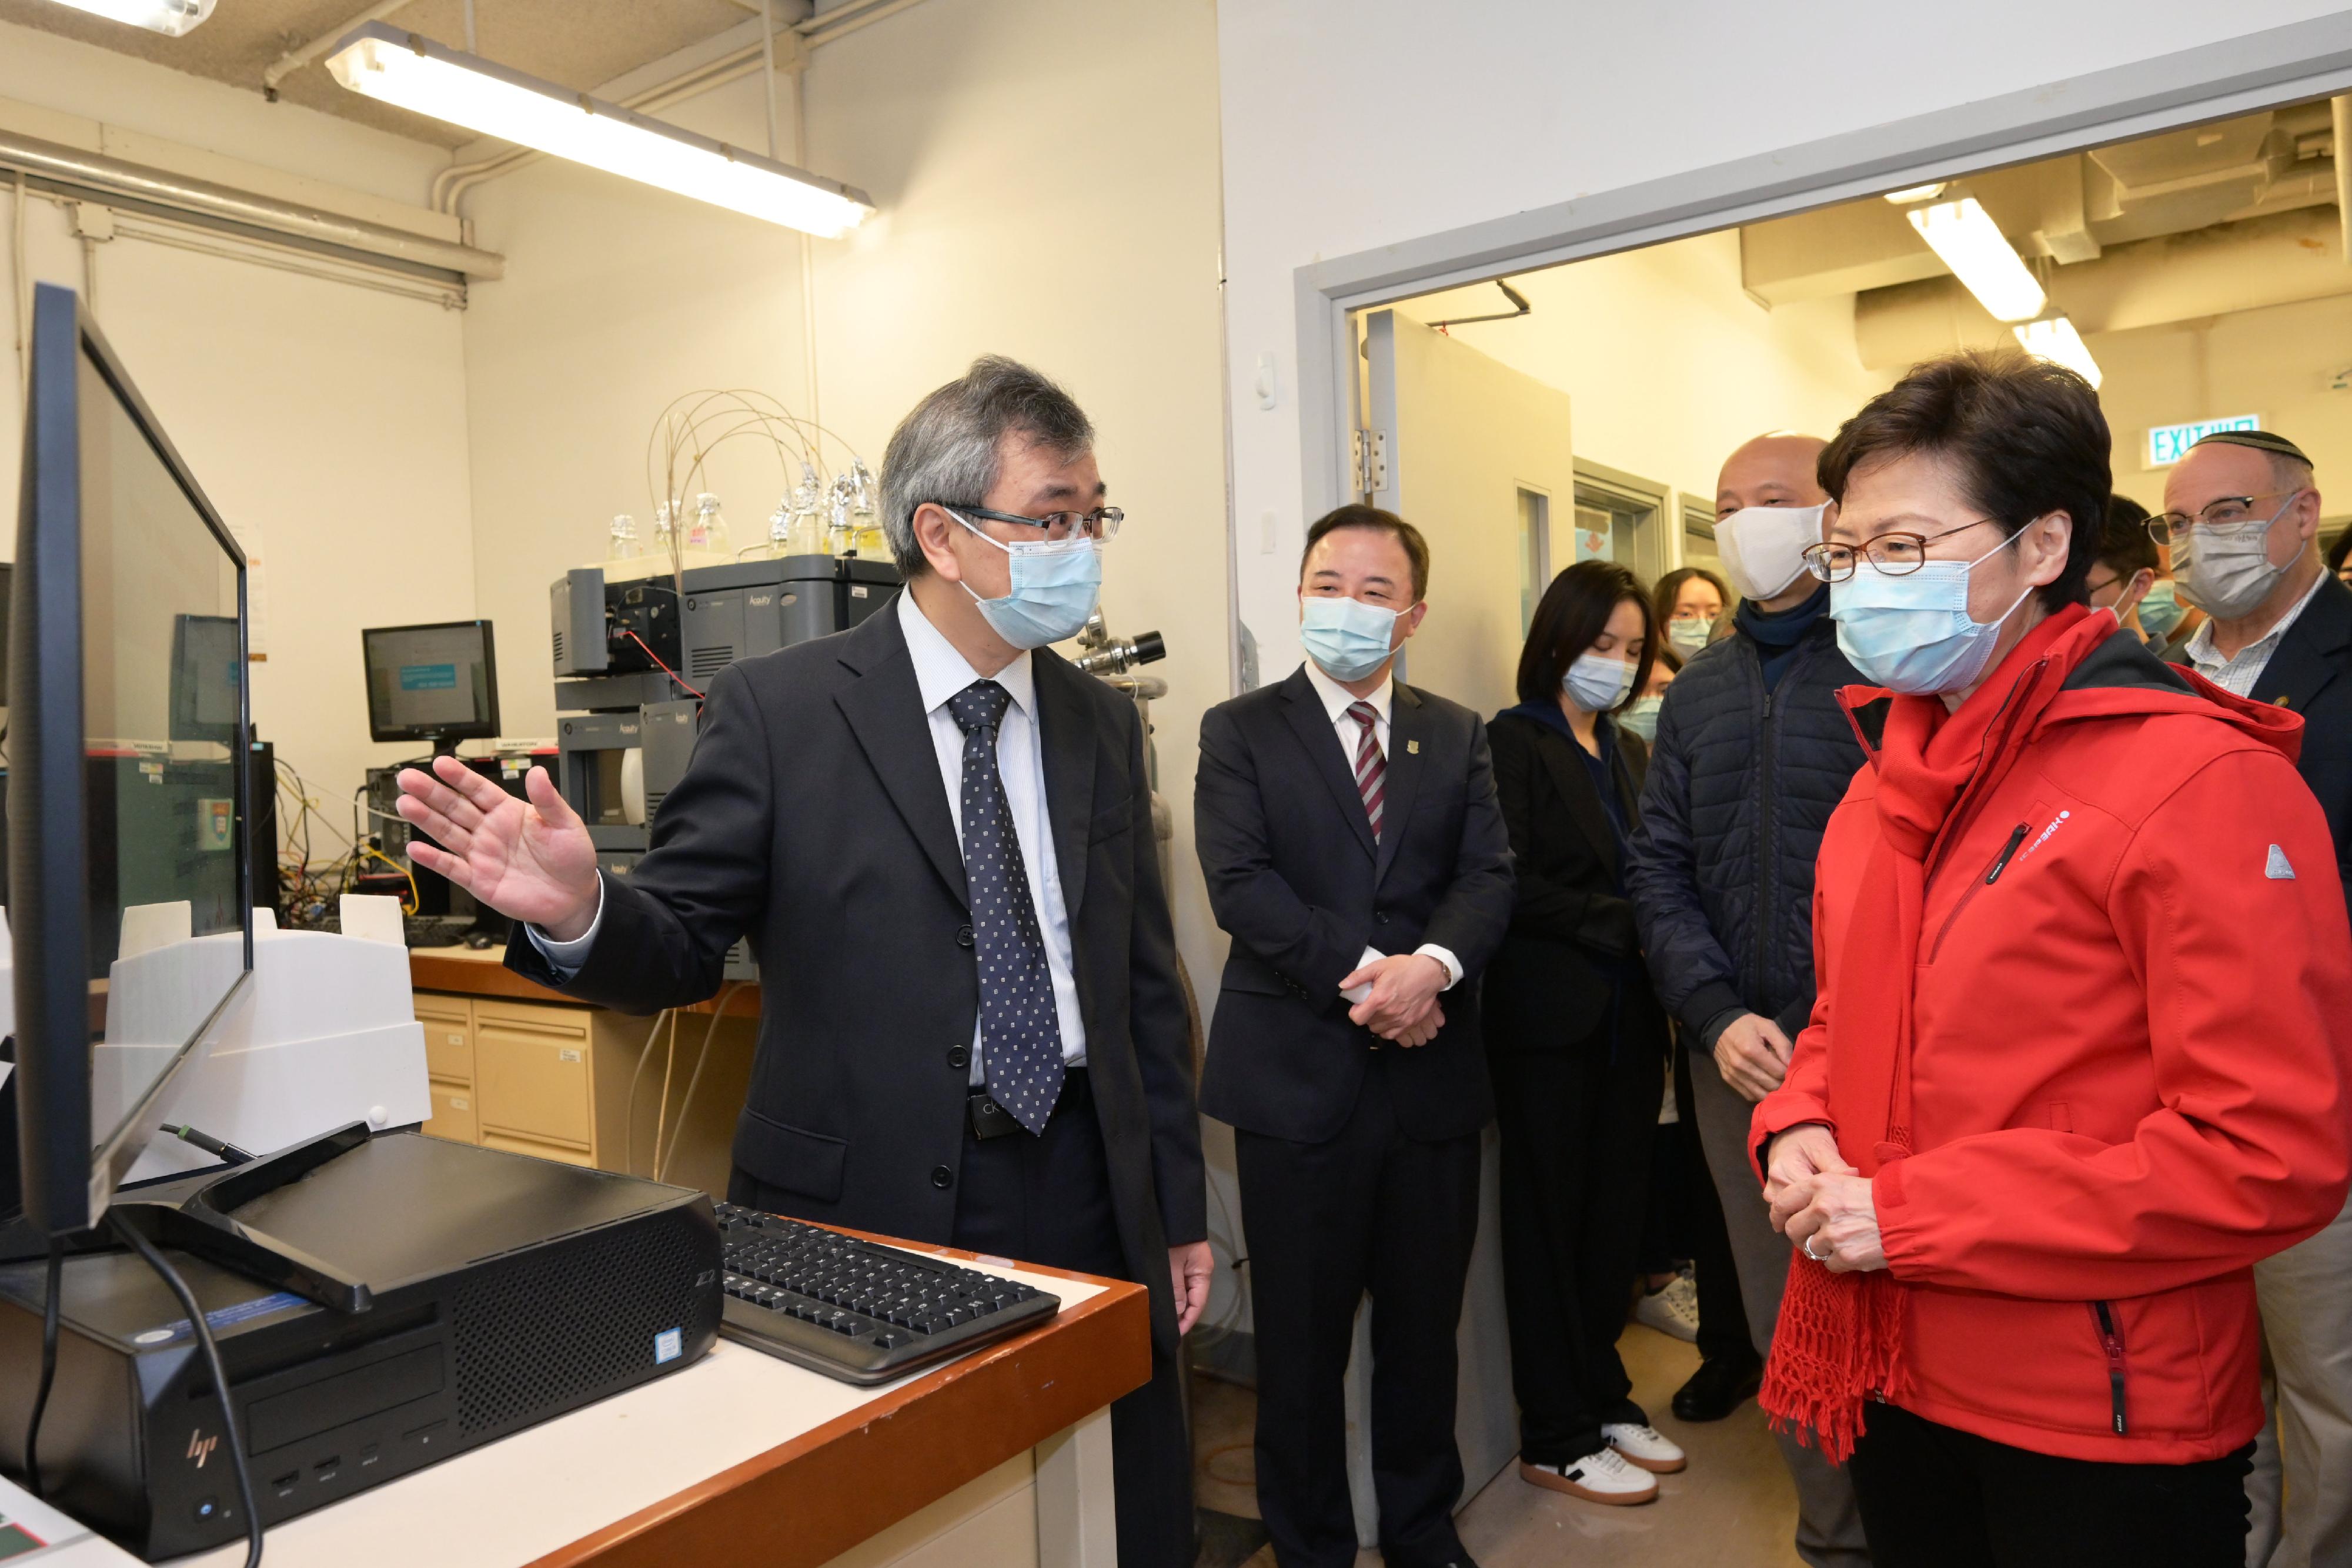 The Chief Executive, Mrs Carrie Lam, visited the Environmental Microbiome Engineering and Biotechnology Laboratory of the University of Hong Kong (HKU) today (February 2). Photo shows Mrs Lam (first right) being briefed by Professor Zhang Tong (first left) of the laboratory, on the treatment of sewage samples and testing process. Looking on are the Secretary for the Environment, Mr Wong Kam-sing (second right) and the President and Vice-Chancellor of HKU, Professor Zhang Xiang (second left).